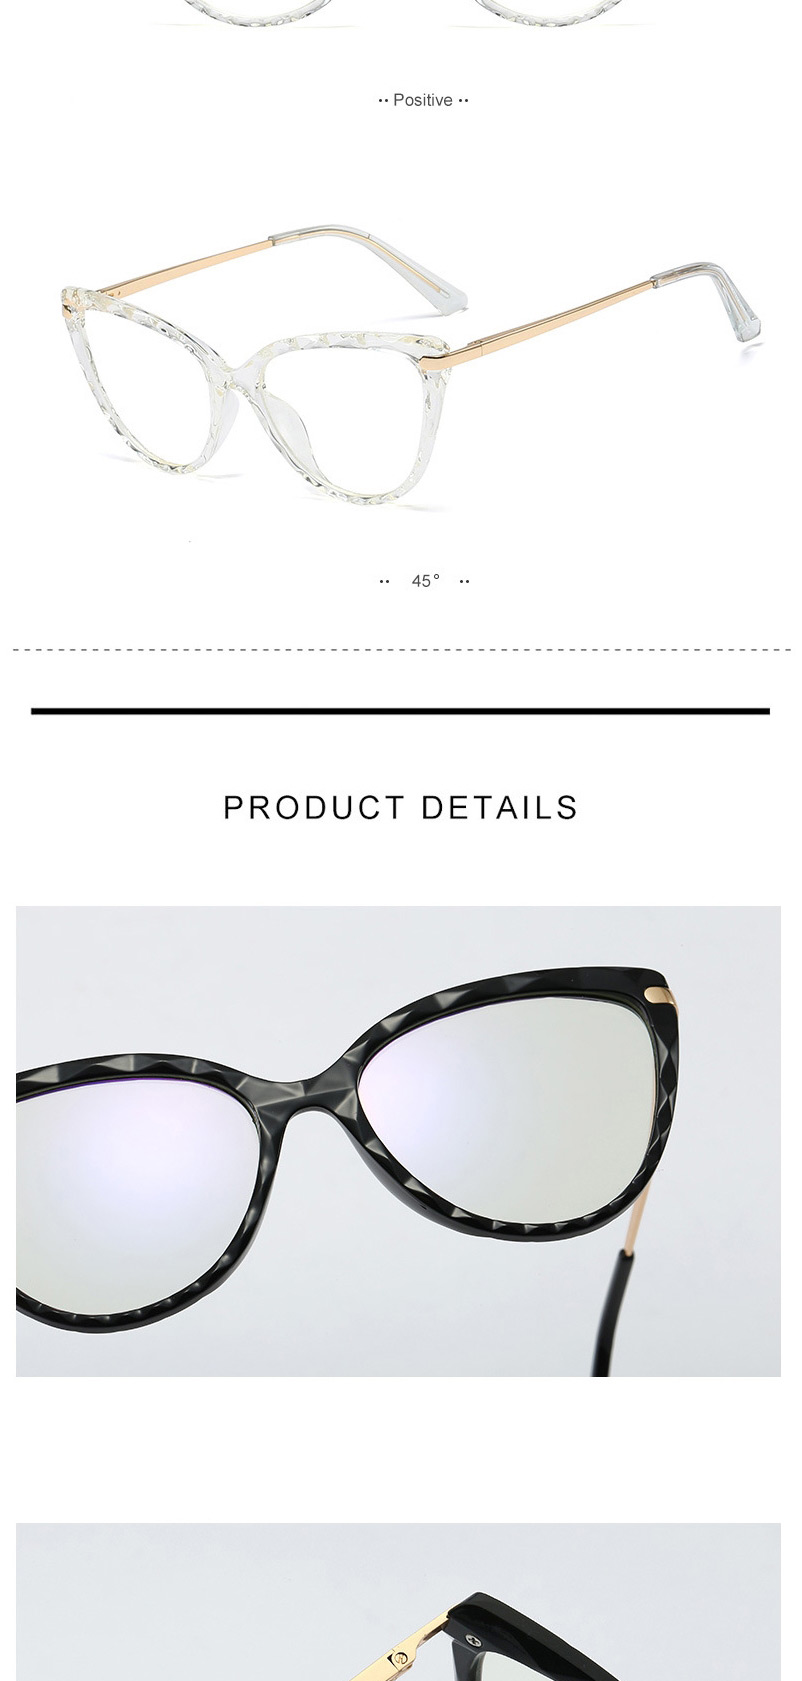 Fashion C5 Red/blue Light Tr90 Spring Cut Edge Anti-blue Light Can Be Equipped With Myopia Flat Lens,Fashion Glasses